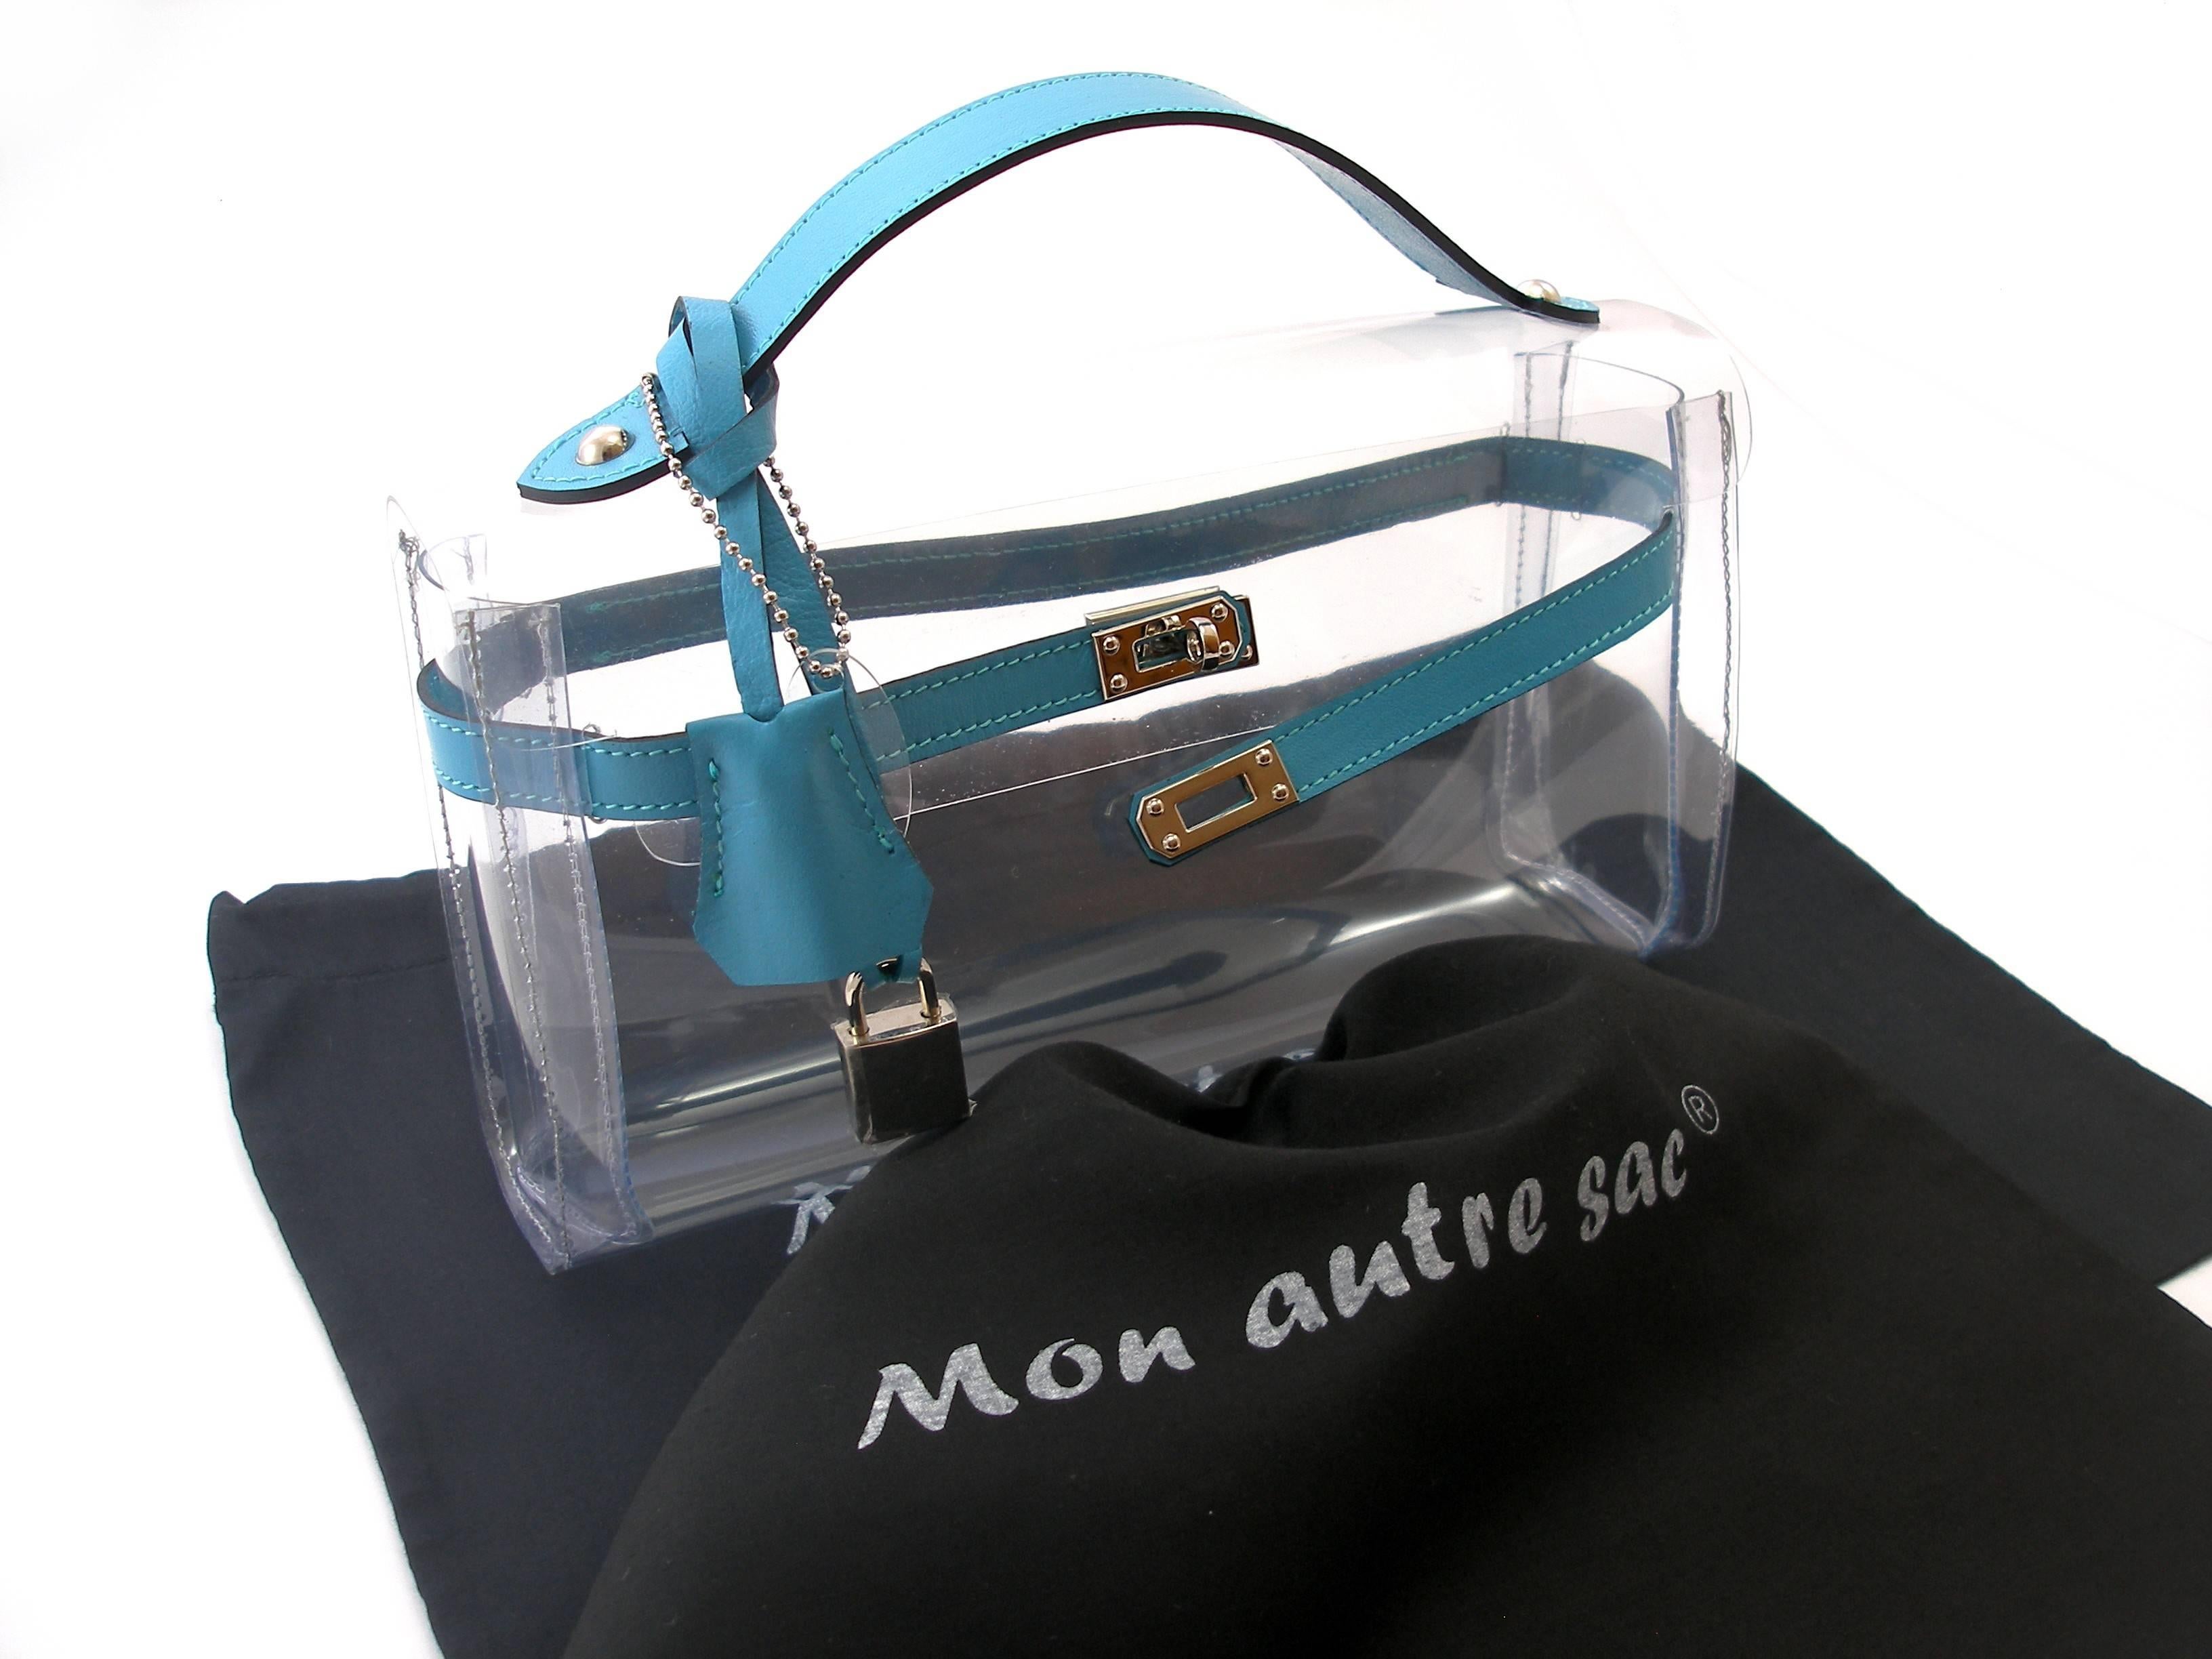 MA-GNI-FIC 
Our own production and brand filed Mon Autre Sac ® 
Highlight your luxury accessories!
Nice Pvc and Leather Bag 
Clutch Crystal 
Size :   L 25 X H 14 X P 6
Bleu leather 
Brand New
Its comes with dustbag  Mon Autre Sac ®
INTERNATIONALS